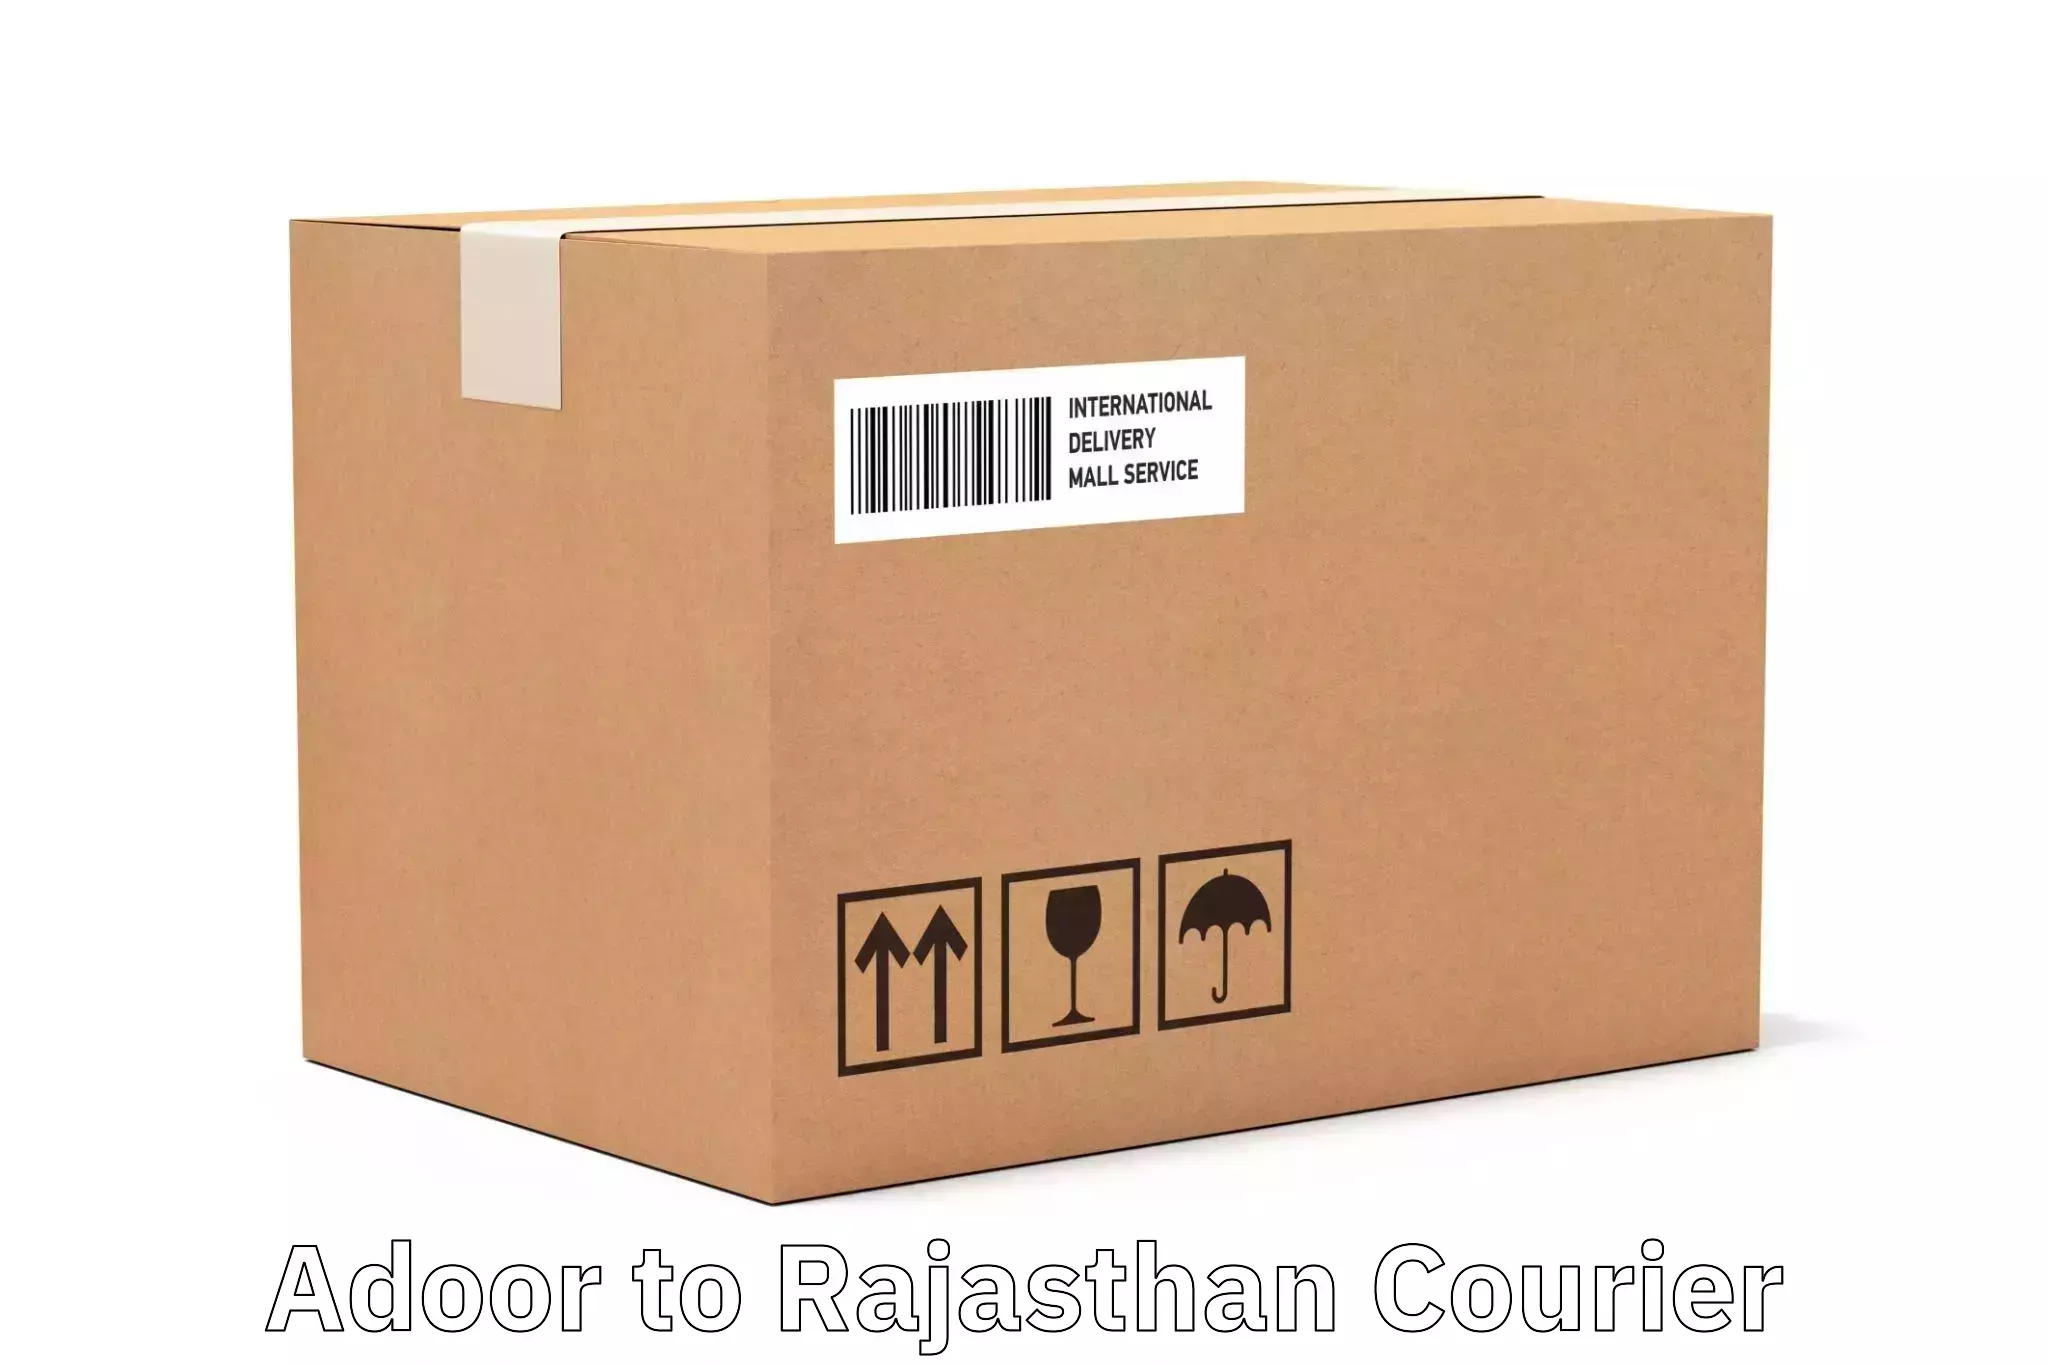 Same-day delivery solutions Adoor to Jaipur